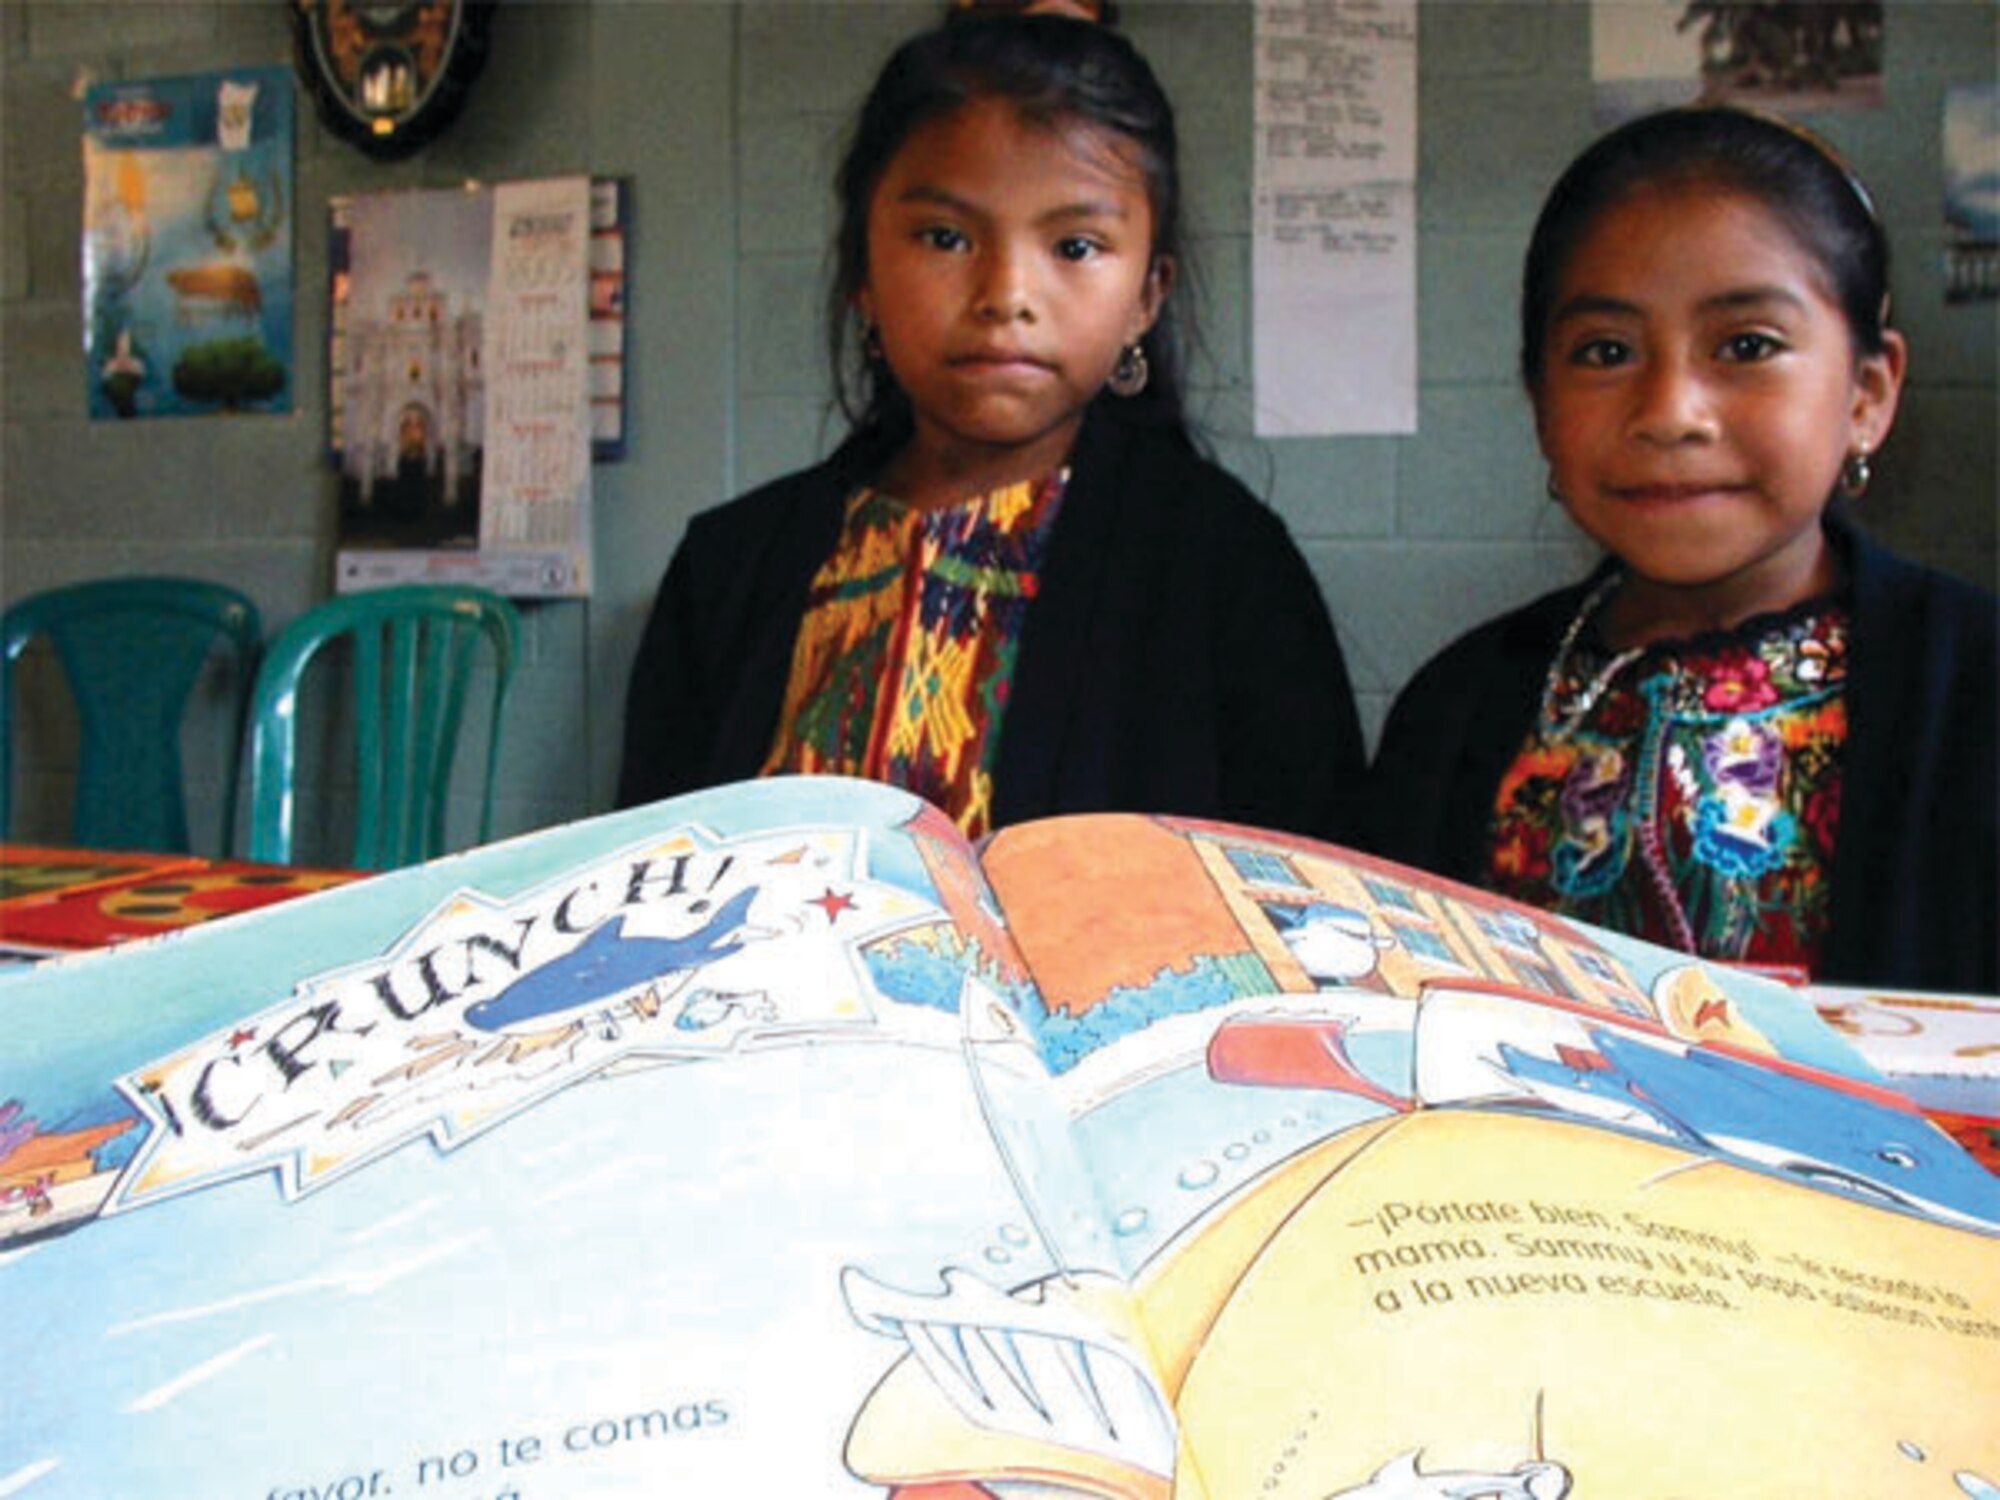 Guatemalan girls look at their new school books, which were provided through humanitarian assistance through the U.S. Agency for International Development. The 709th Airlift Squadron flew a similar mission Dec. 5-6 delivering 64,000 pounds of supplies to Guatemala City International Airport to assist a local grade school and orphanage about five hours away from the airport. The humanitarian mission was part of the Denton Program, a Department of Defense humanitarian assistance transportation program that utilizes space available military air, surface and sea-lift assets. The program is jointly administered by the Department of State, DoD and USAID. (USAID photo)